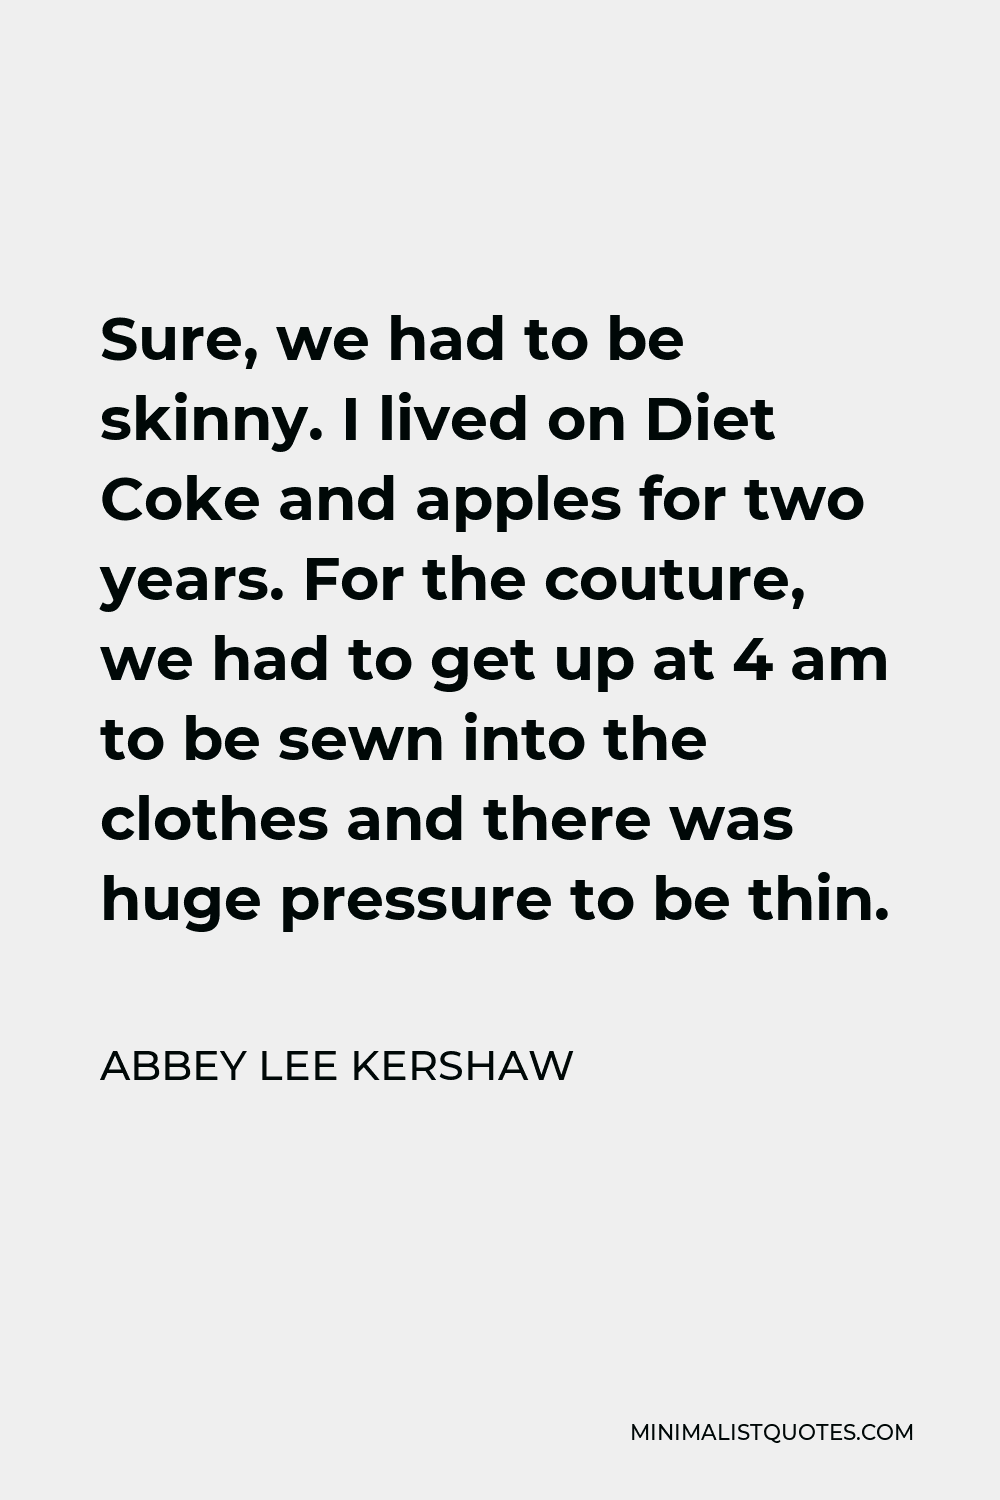 Abbey Lee Kershaw Quote - Sure, we had to be skinny. I lived on Diet Coke and apples for two years. For the couture, we had to get up at 4 am to be sewn into the clothes and there was huge pressure to be thin.